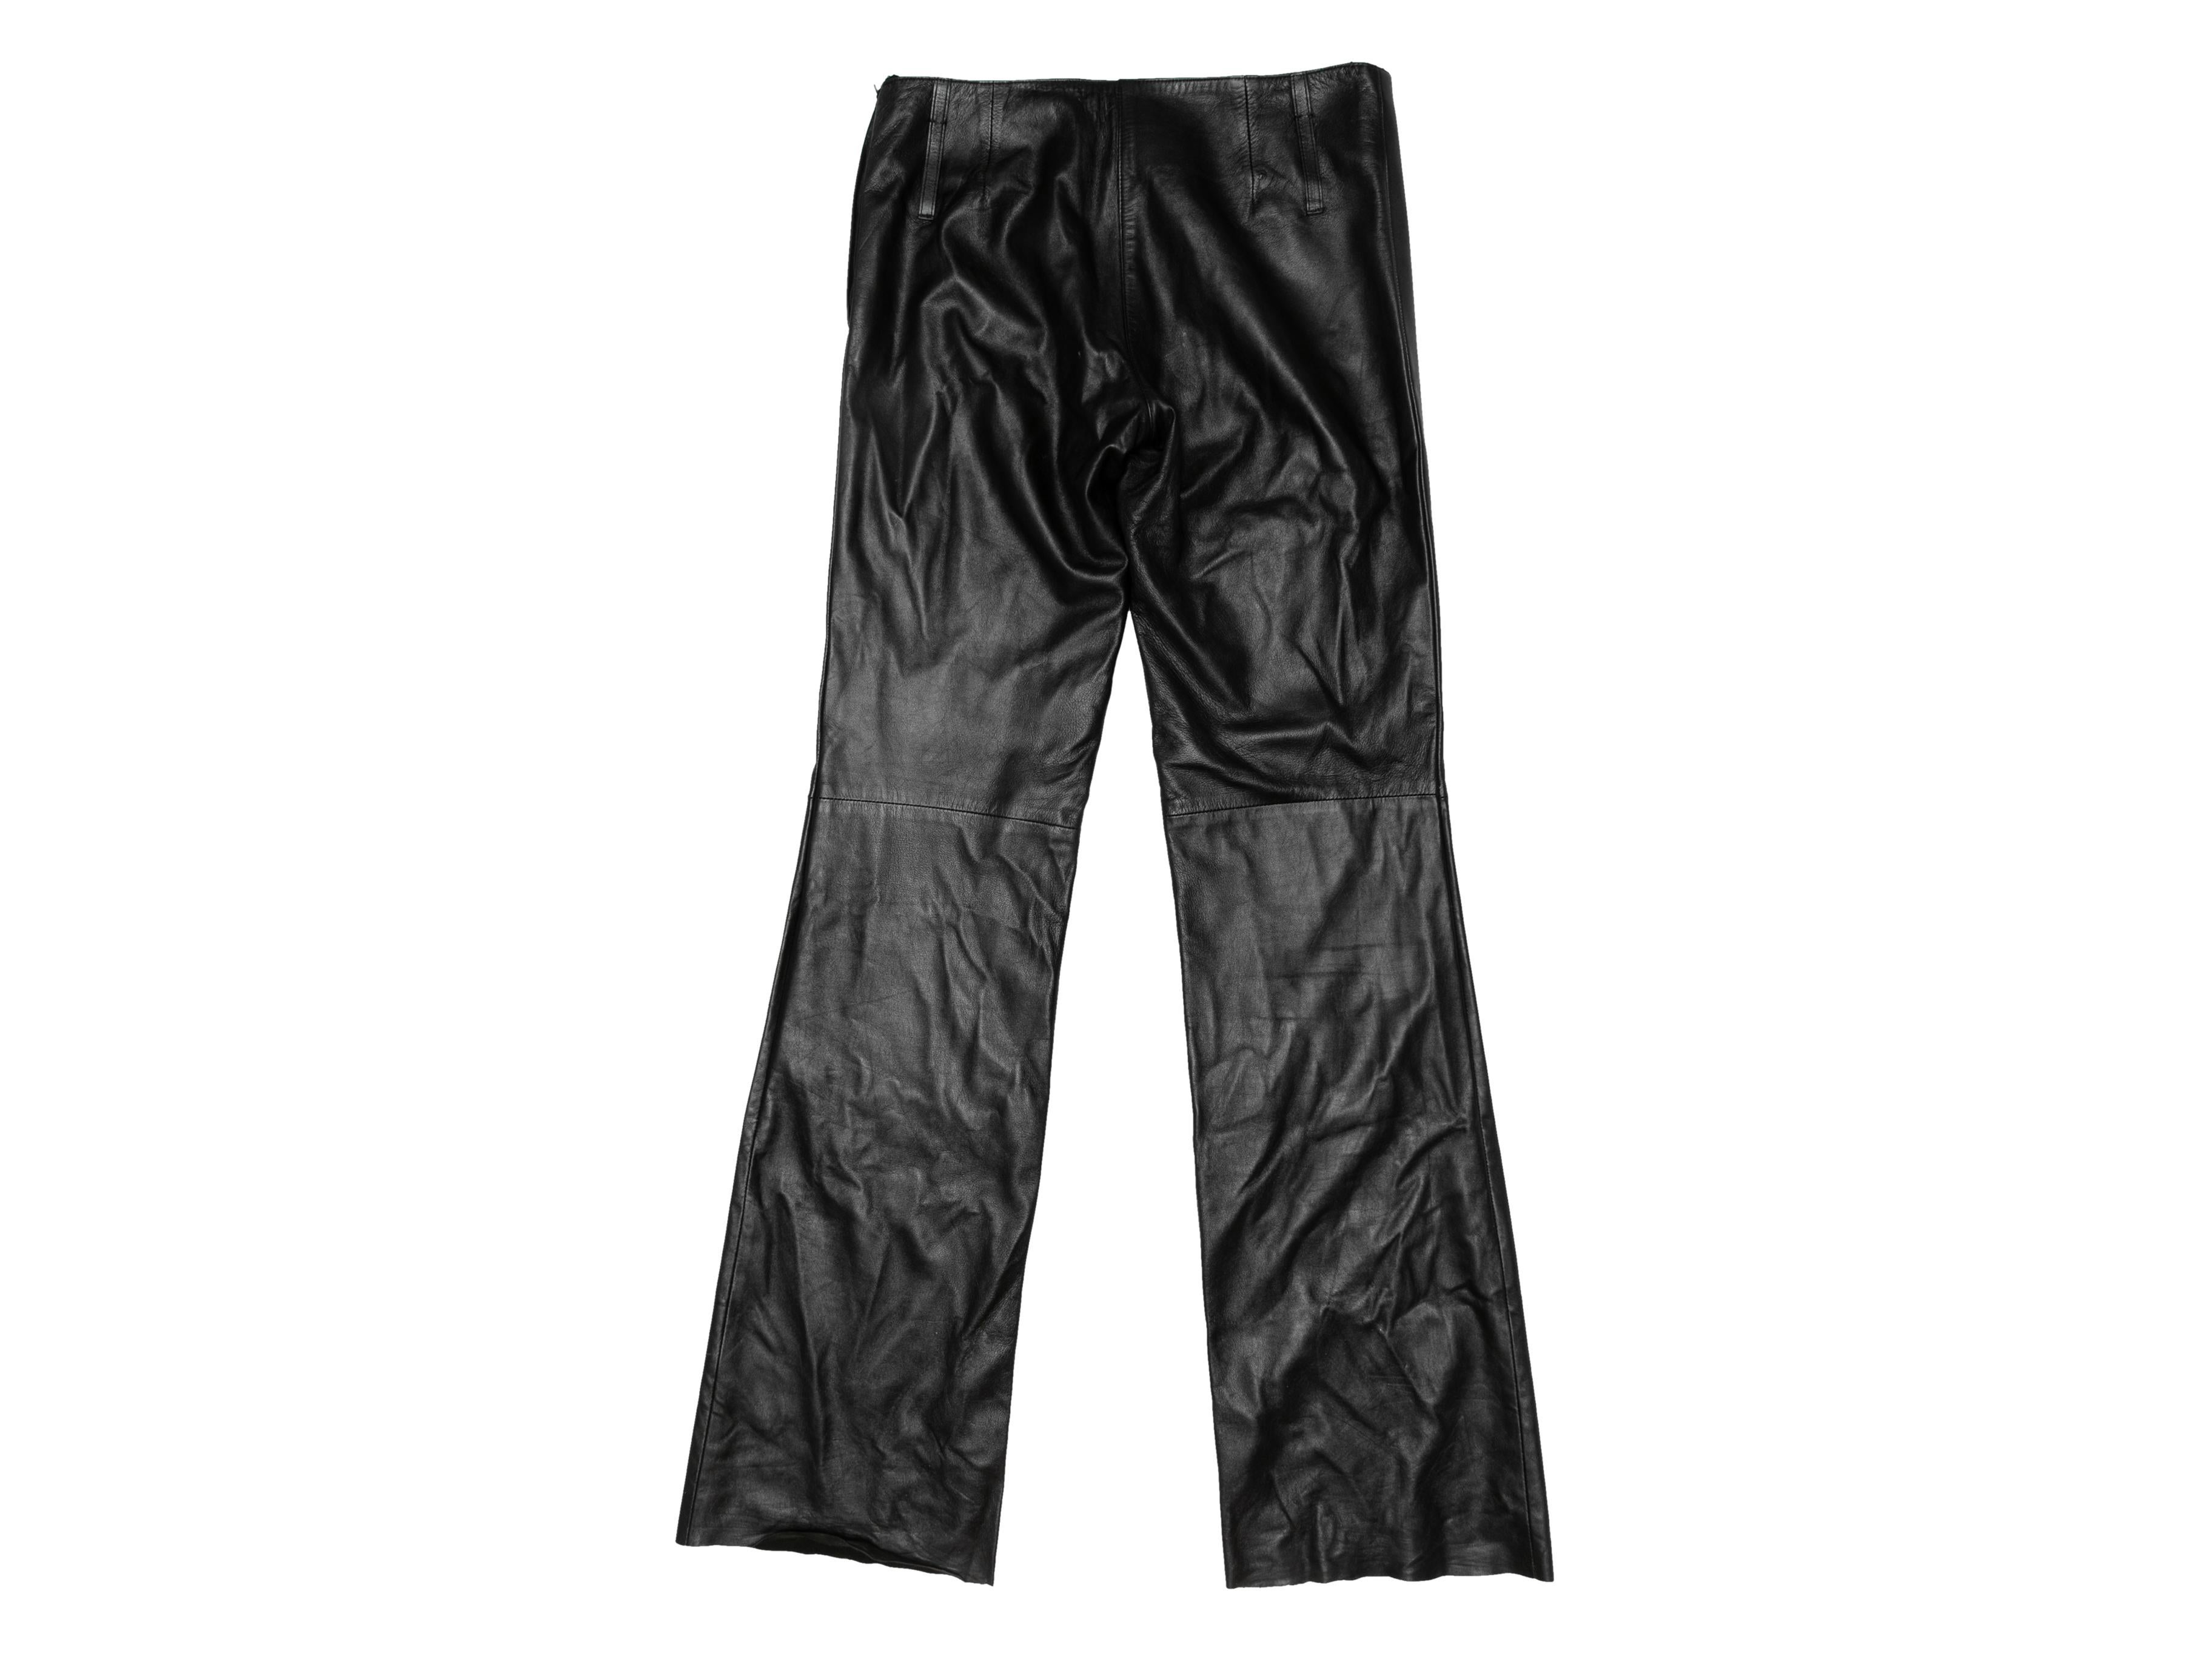 Vintage black leather pants by Prada. Circa late 1990s/early 2000s. Side zip closure. Designer size 44. 30